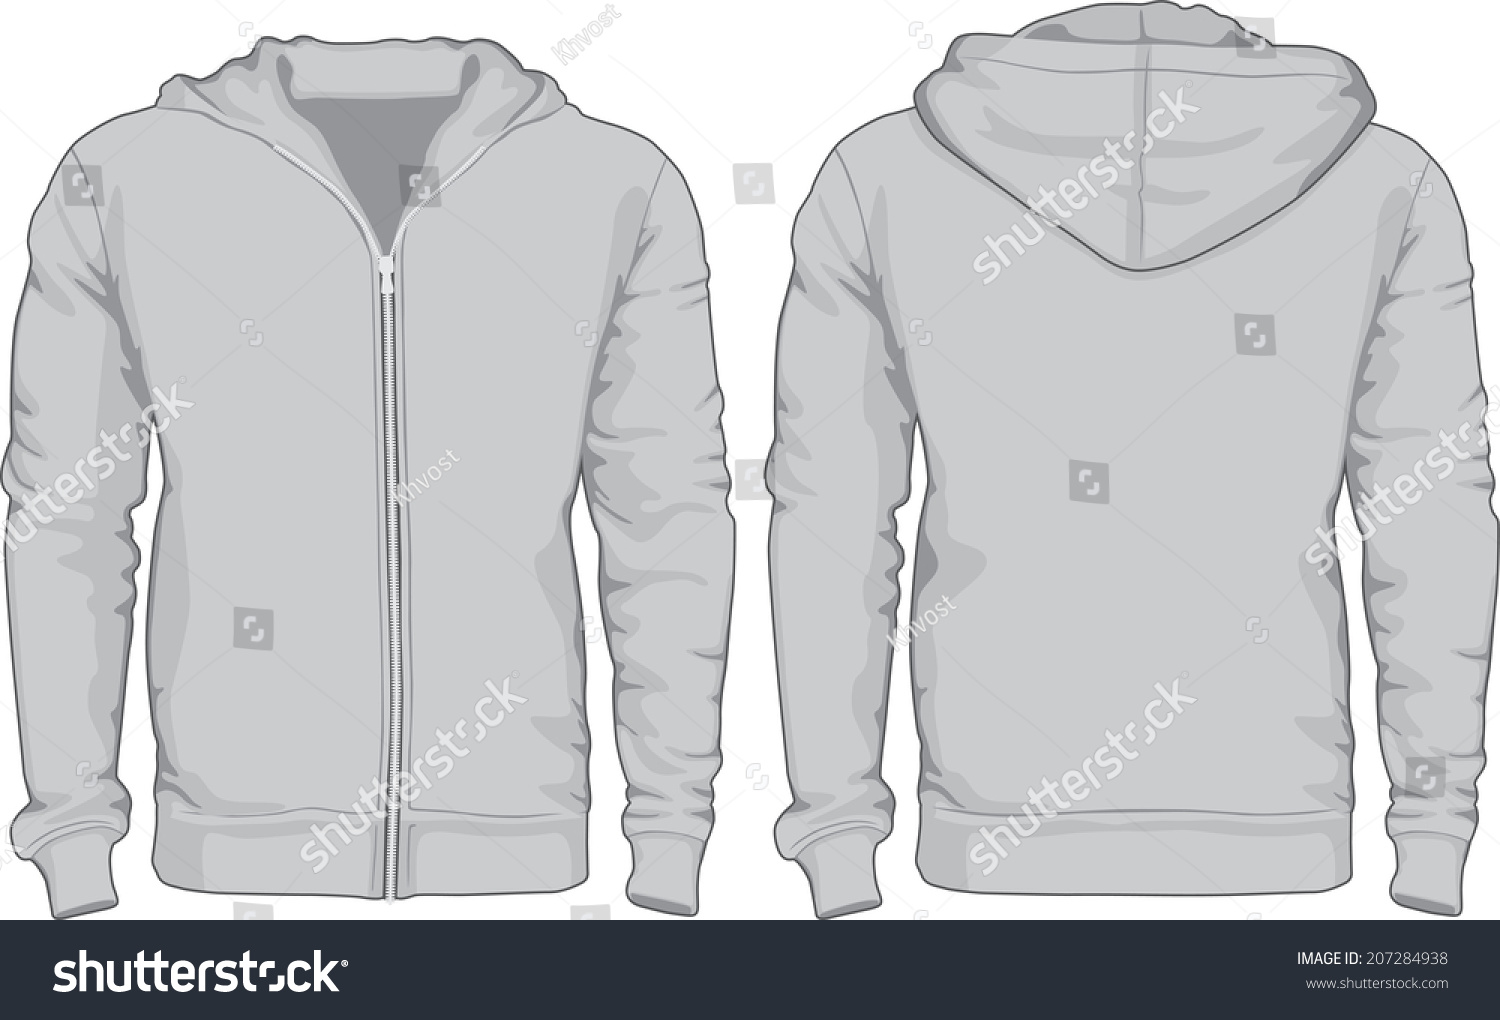 Men'S Hoodie Shirts Template. Front And Back Views. Vector Illustration ...